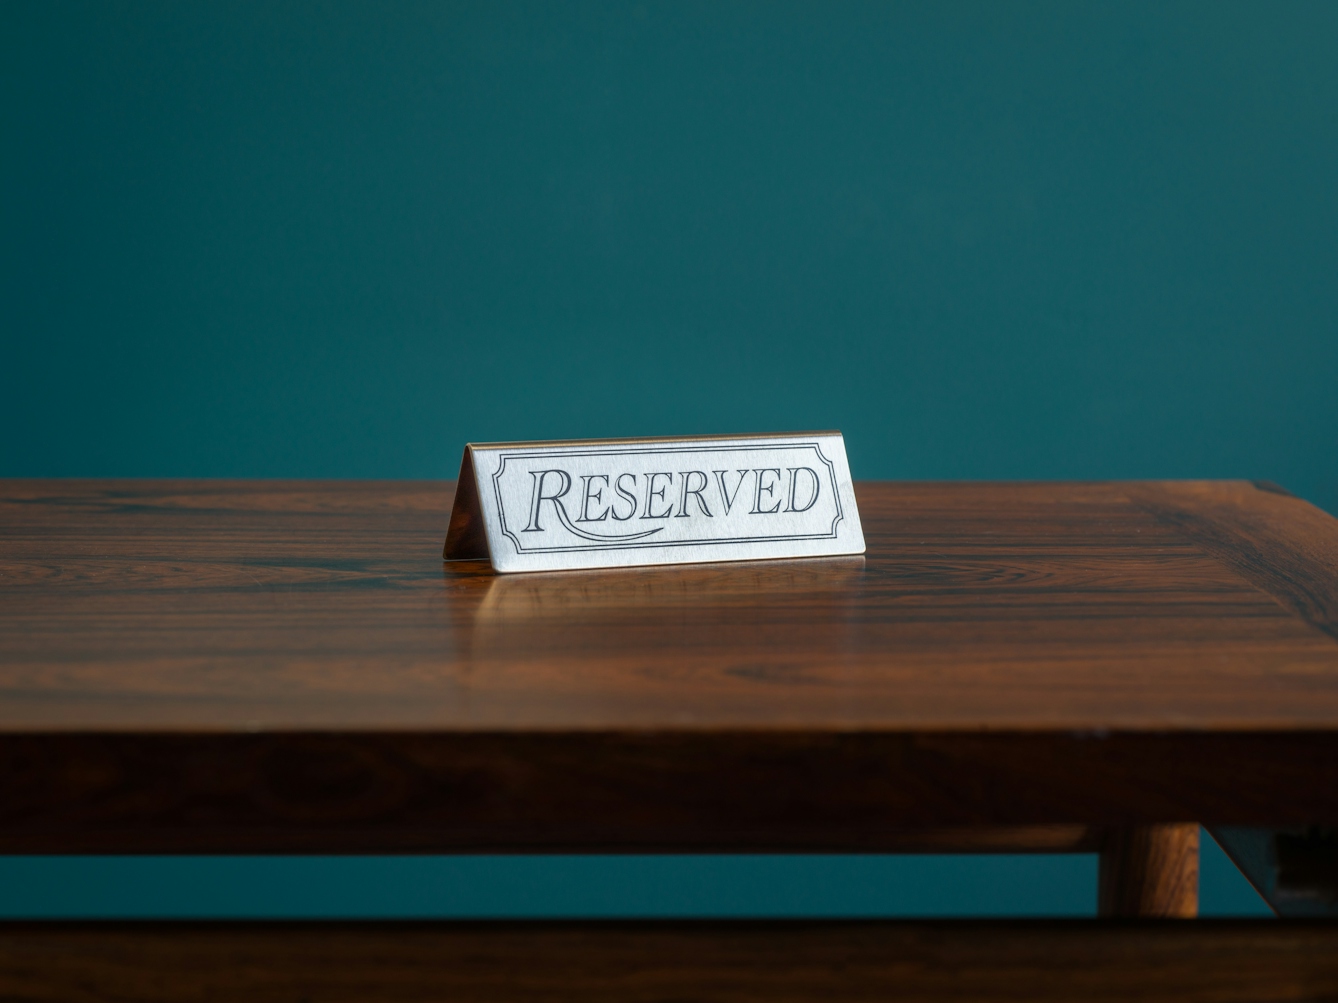 A photograph of a dark wood tabletop against a teal coloured background. On the table top is a small metal sign with the text ‘reserved’ etched on it.
